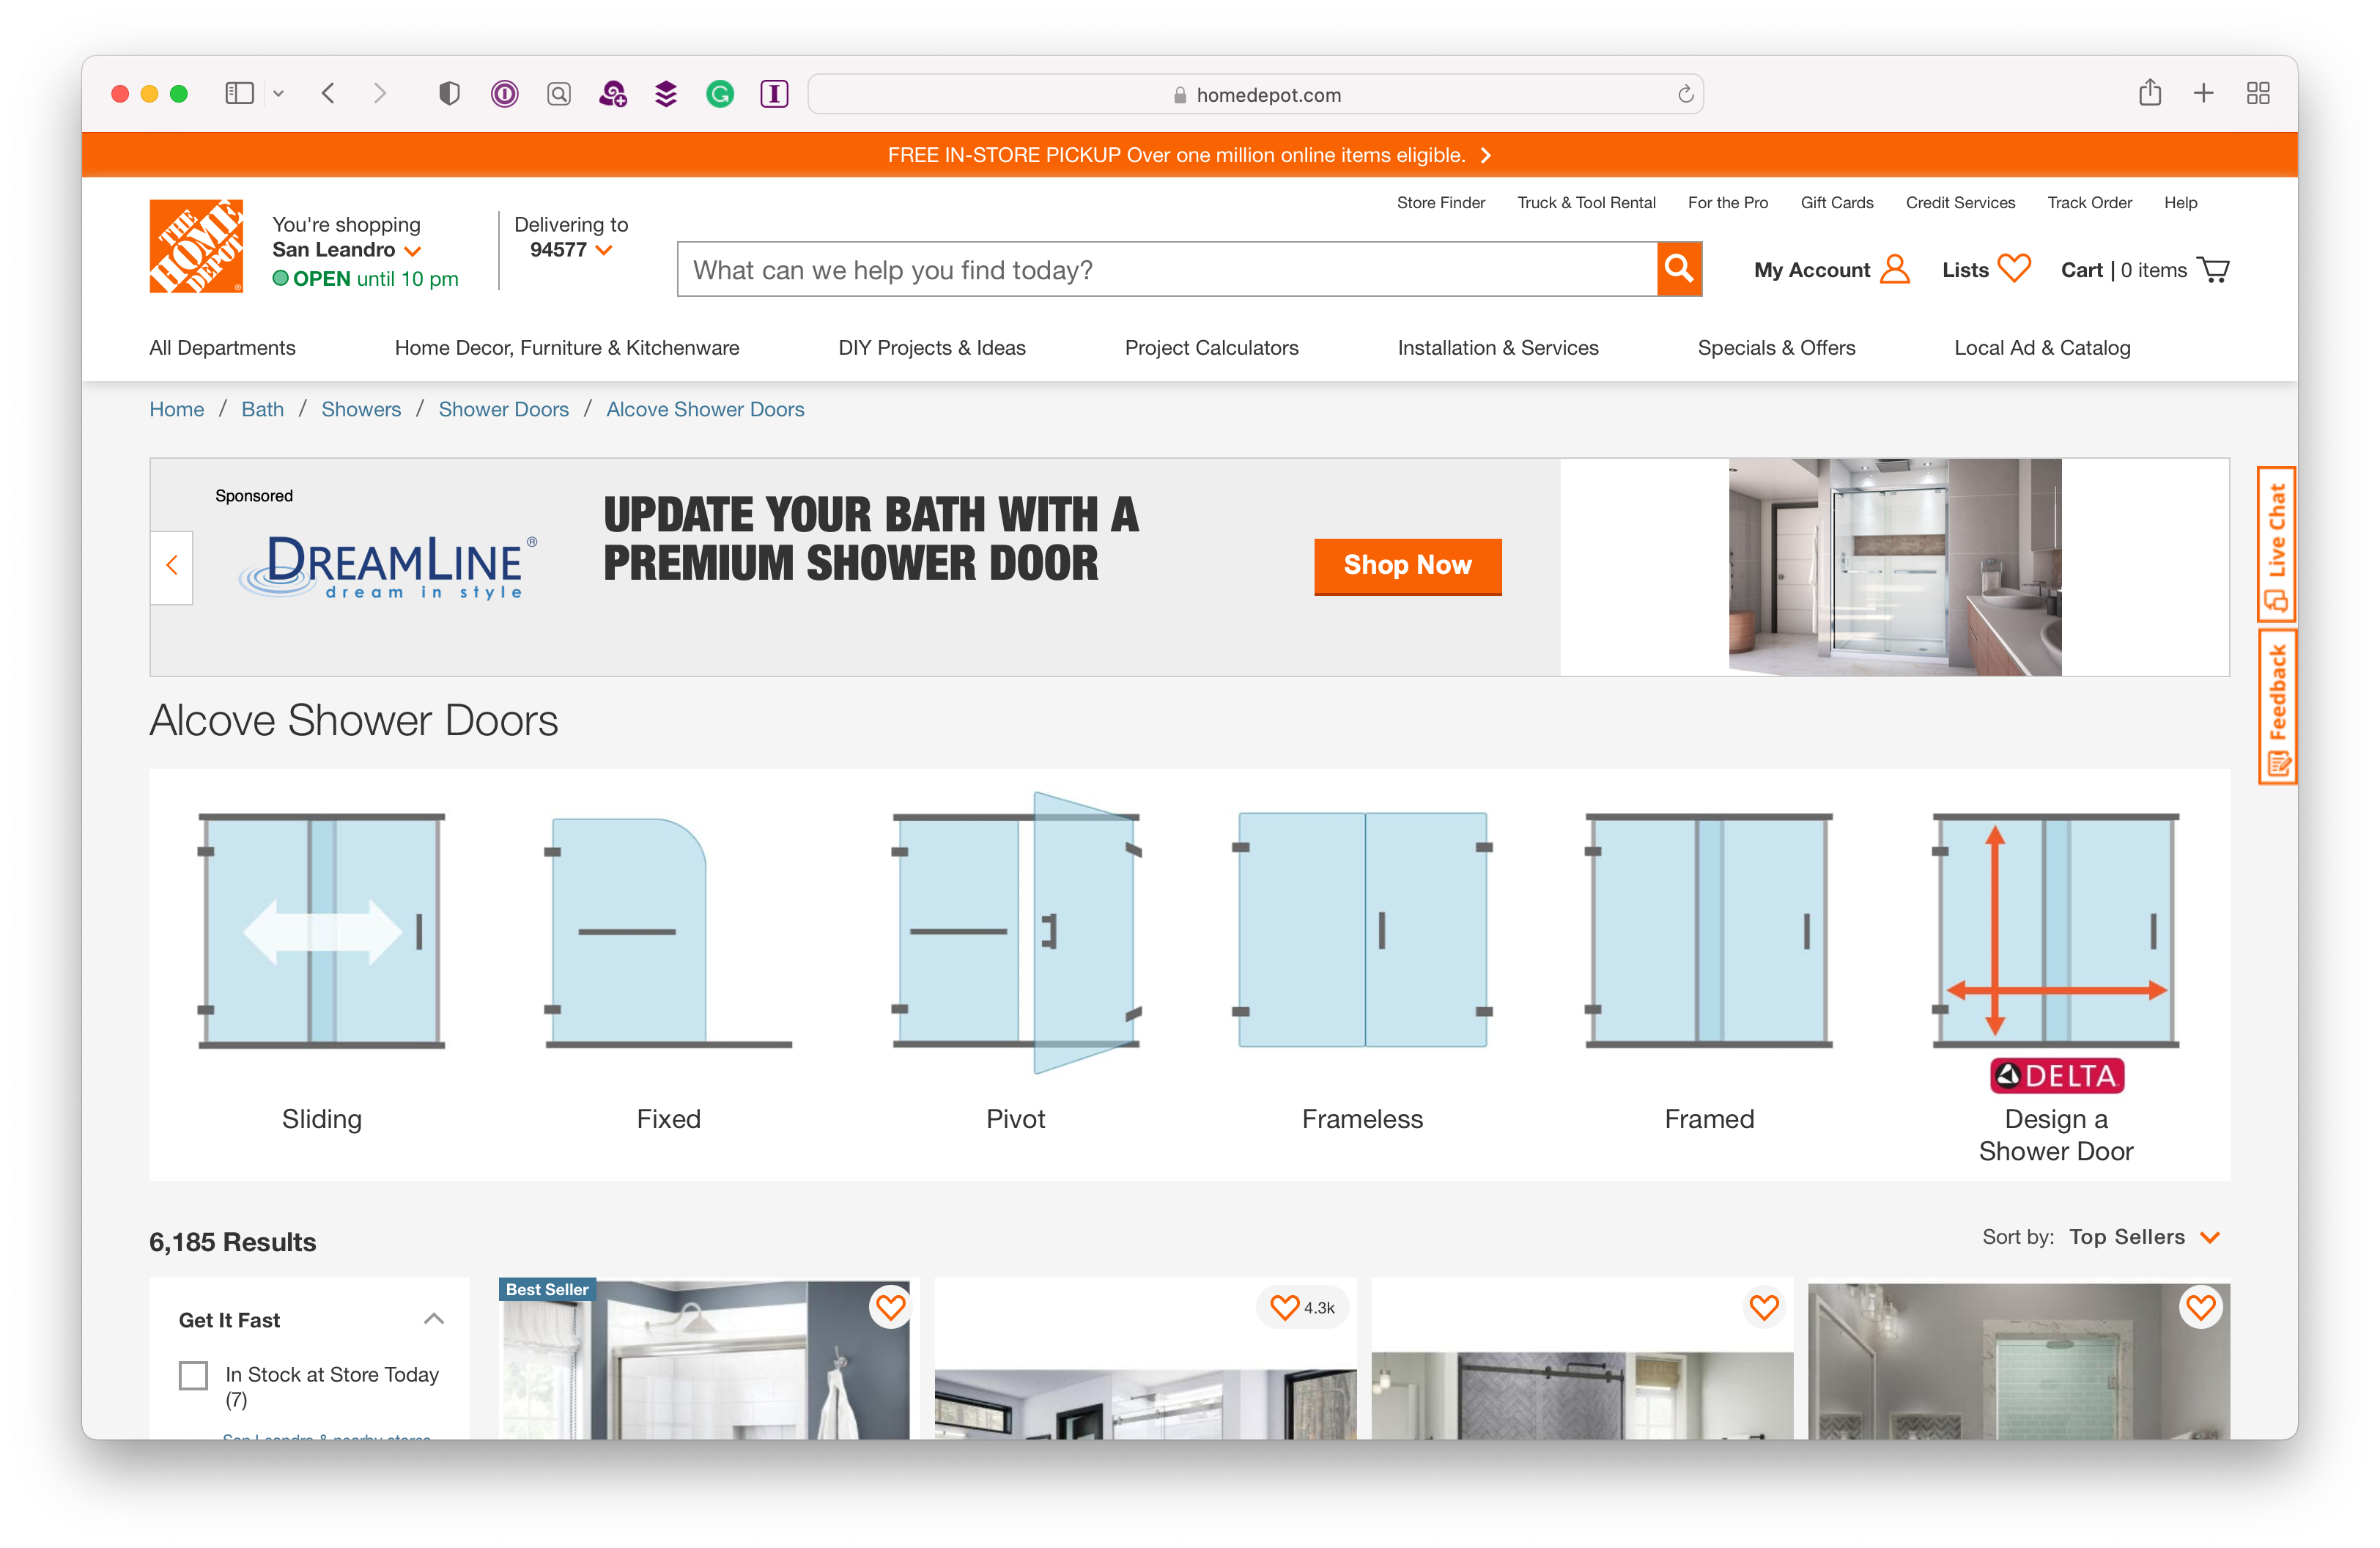 A search results screen on homedepot.com, showing types of mechanisms for affixing shower doors to homes, illustrated with diagrams.